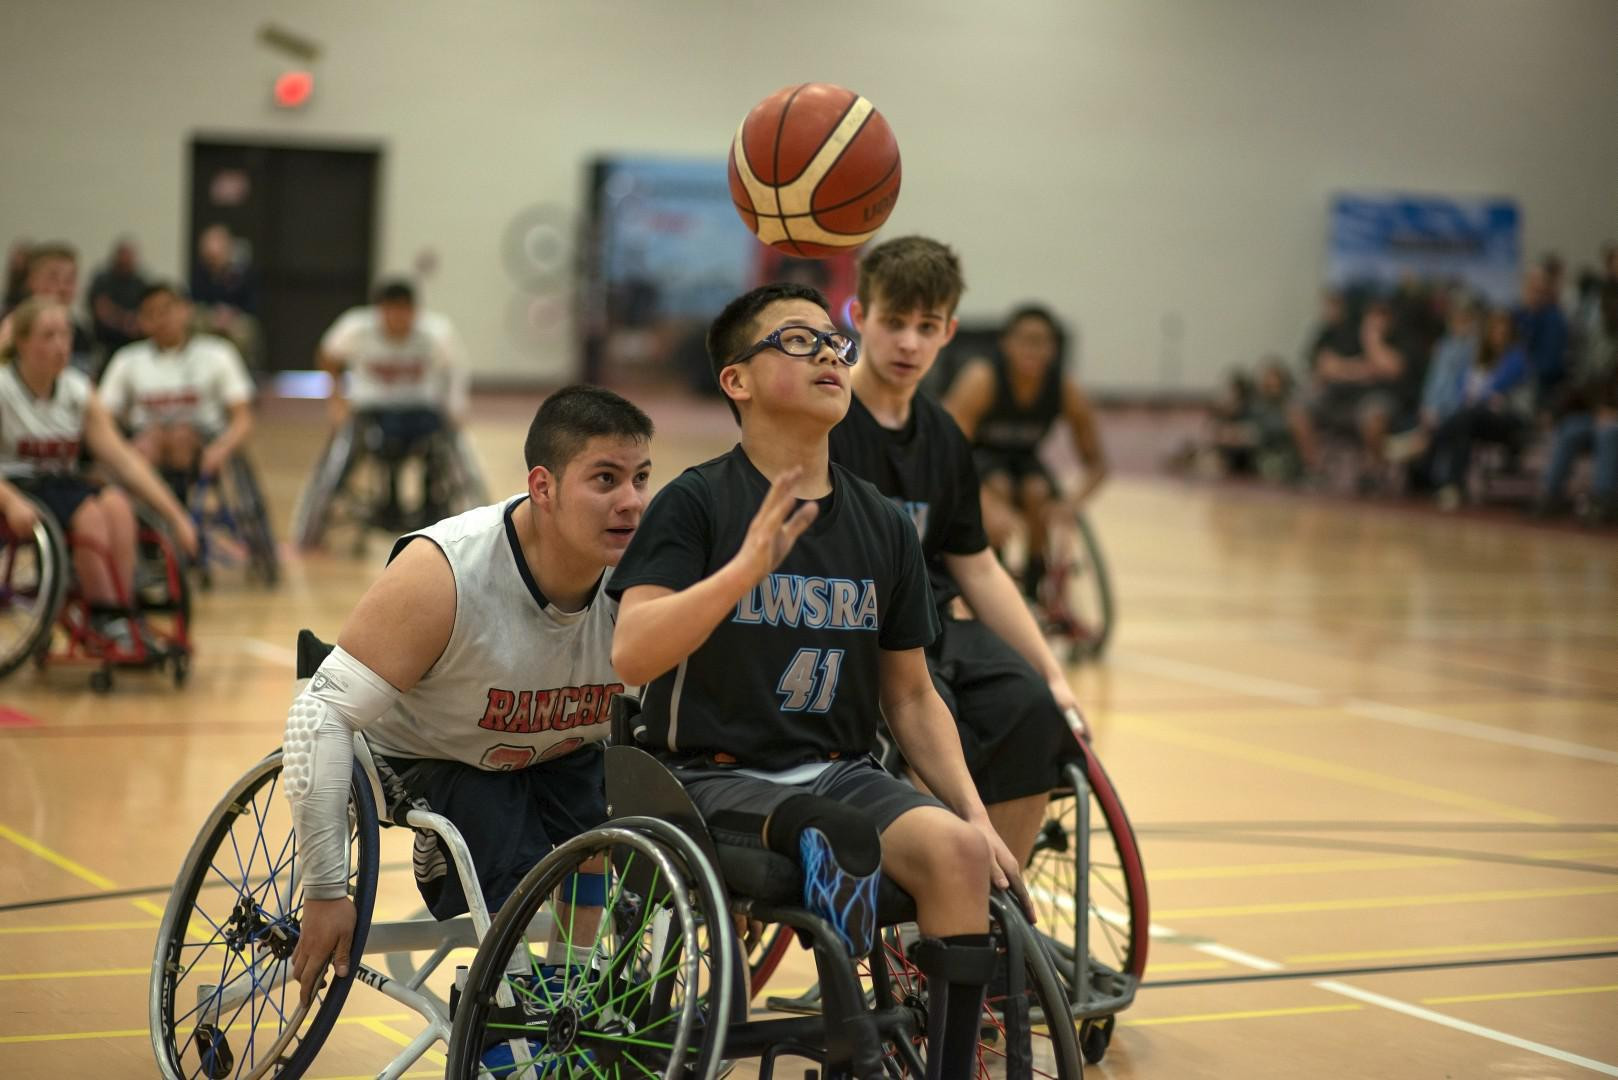 The NWBA is the governing body for wheelchair basketball in the United States ©NWBA